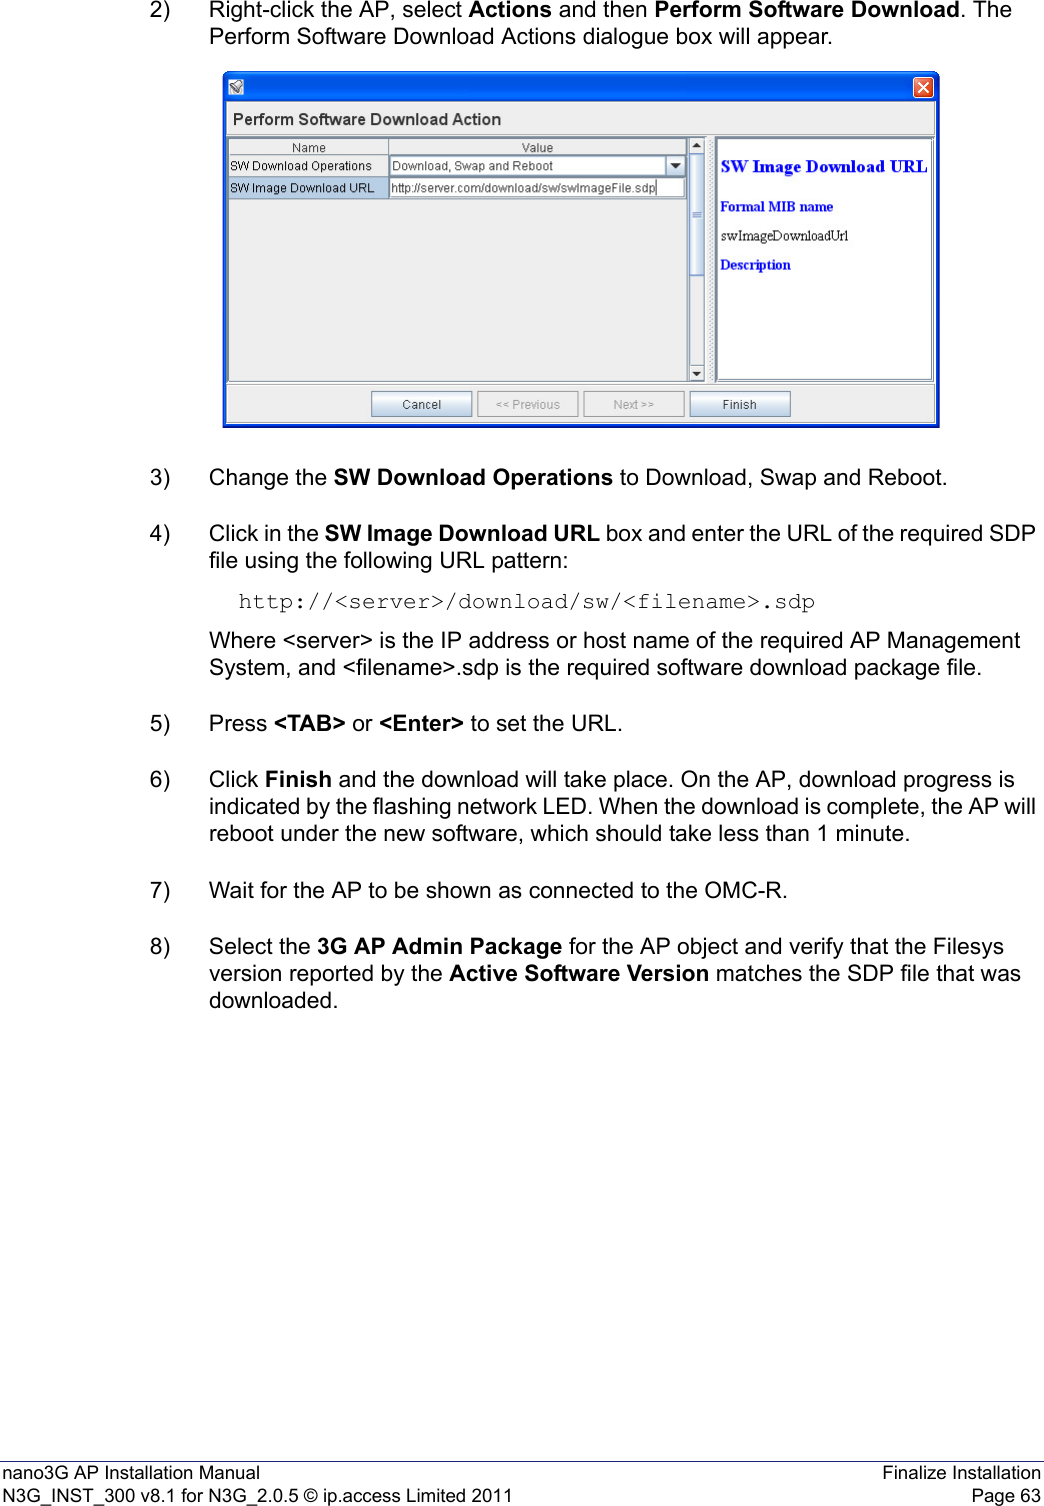 nano3G AP Installation Manual Finalize InstallationN3G_INST_300 v8.1 for N3G_2.0.5 © ip.access Limited 2011 Page 632) Right-click the AP, select Actions and then Perform Software Download. The Perform Software Download Actions dialogue box will appear. 3) Change the SW Download Operations to Download, Swap and Reboot.4) Click in the SW Image Download URL box and enter the URL of the required SDP file using the following URL pattern:http://&lt;server&gt;/download/sw/&lt;filename&gt;.sdpWhere &lt;server&gt; is the IP address or host name of the required AP Management System, and &lt;filename&gt;.sdp is the required software download package file.5) Press &lt;TAB&gt; or &lt;Enter&gt; to set the URL.6) Click Finish and the download will take place. On the AP, download progress is indicated by the flashing network LED. When the download is complete, the AP will reboot under the new software, which should take less than 1 minute. 7) Wait for the AP to be shown as connected to the OMC-R.8) Select the 3G AP Admin Package for the AP object and verify that the Filesys version reported by the Active Software Version matches the SDP file that was downloaded. 